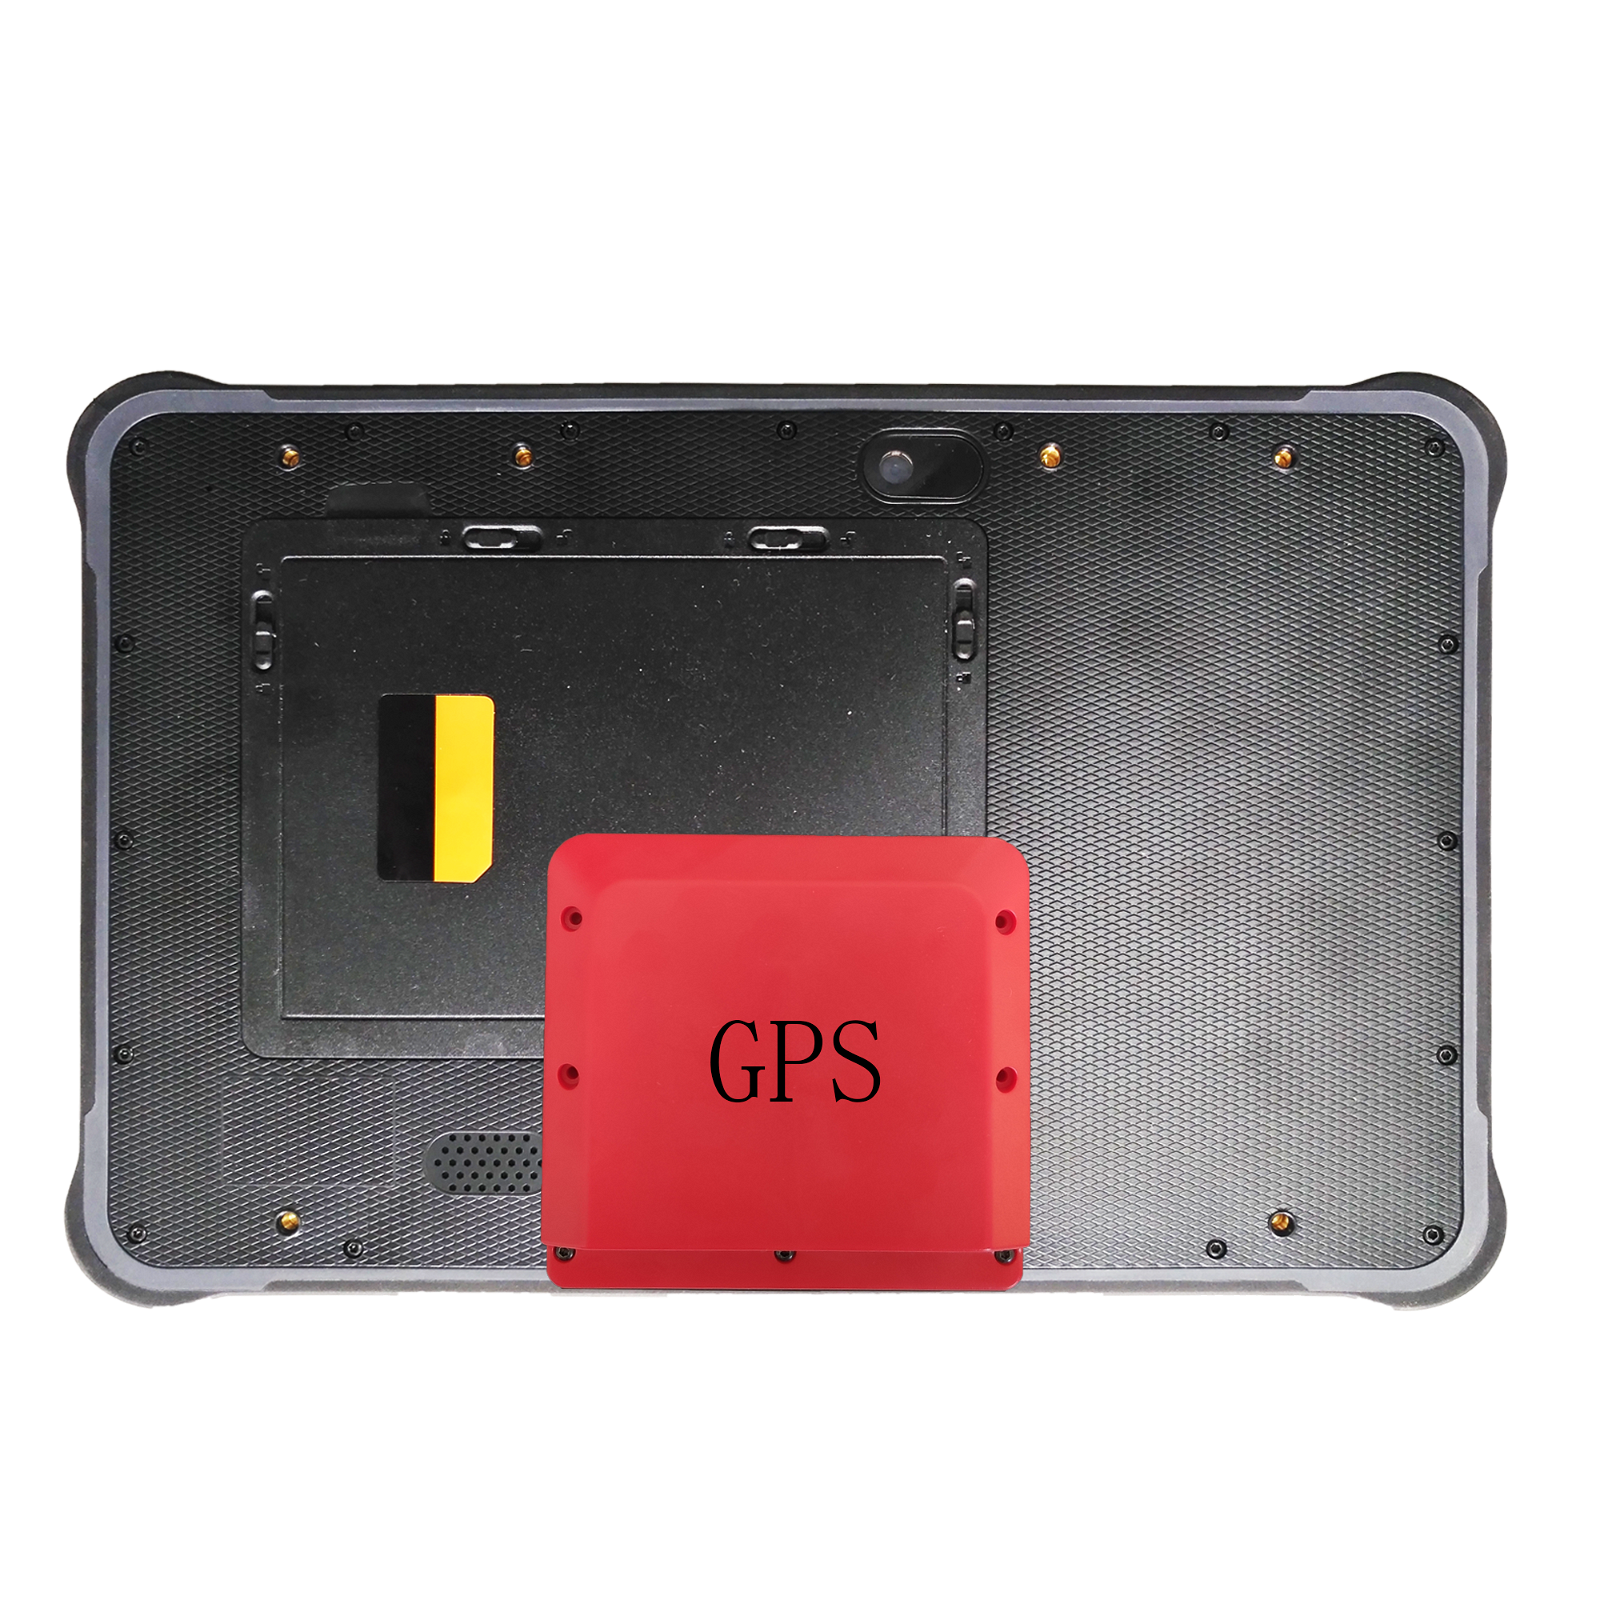 0.5 meter High accuracy GPS windows or Android R   ed Tablet 2